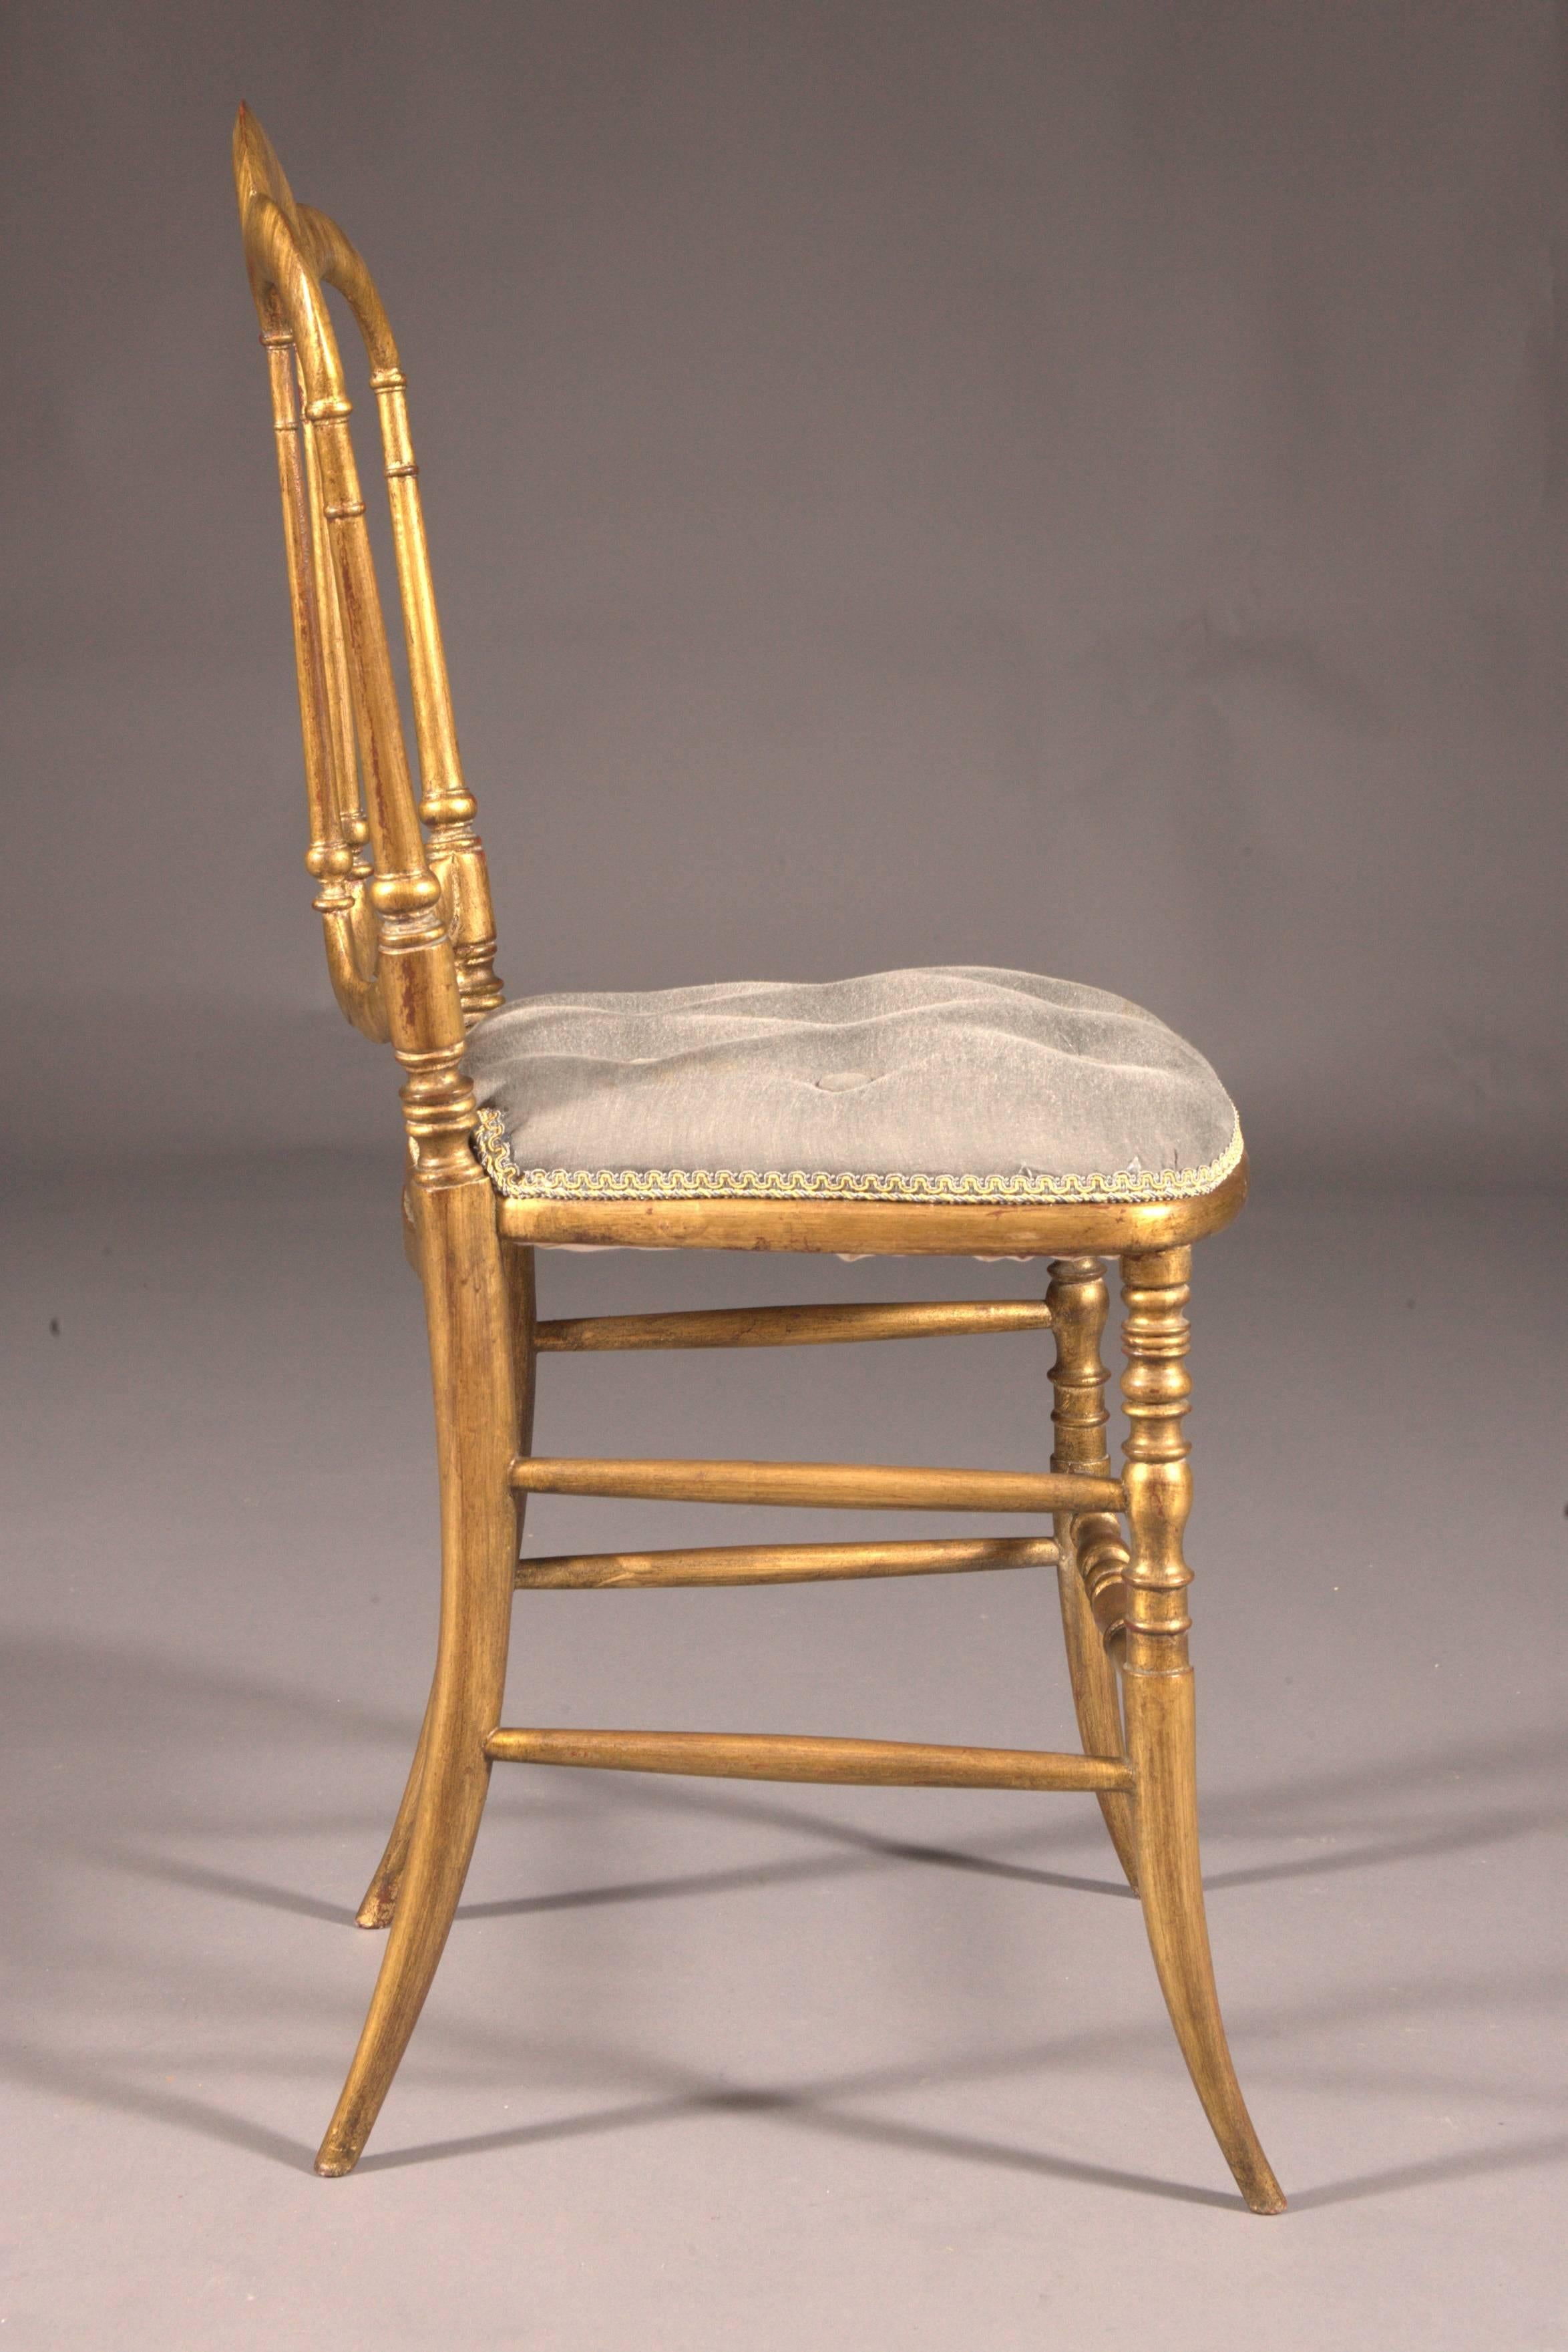 Beech Delicate Chair in the Style of the 19th Century